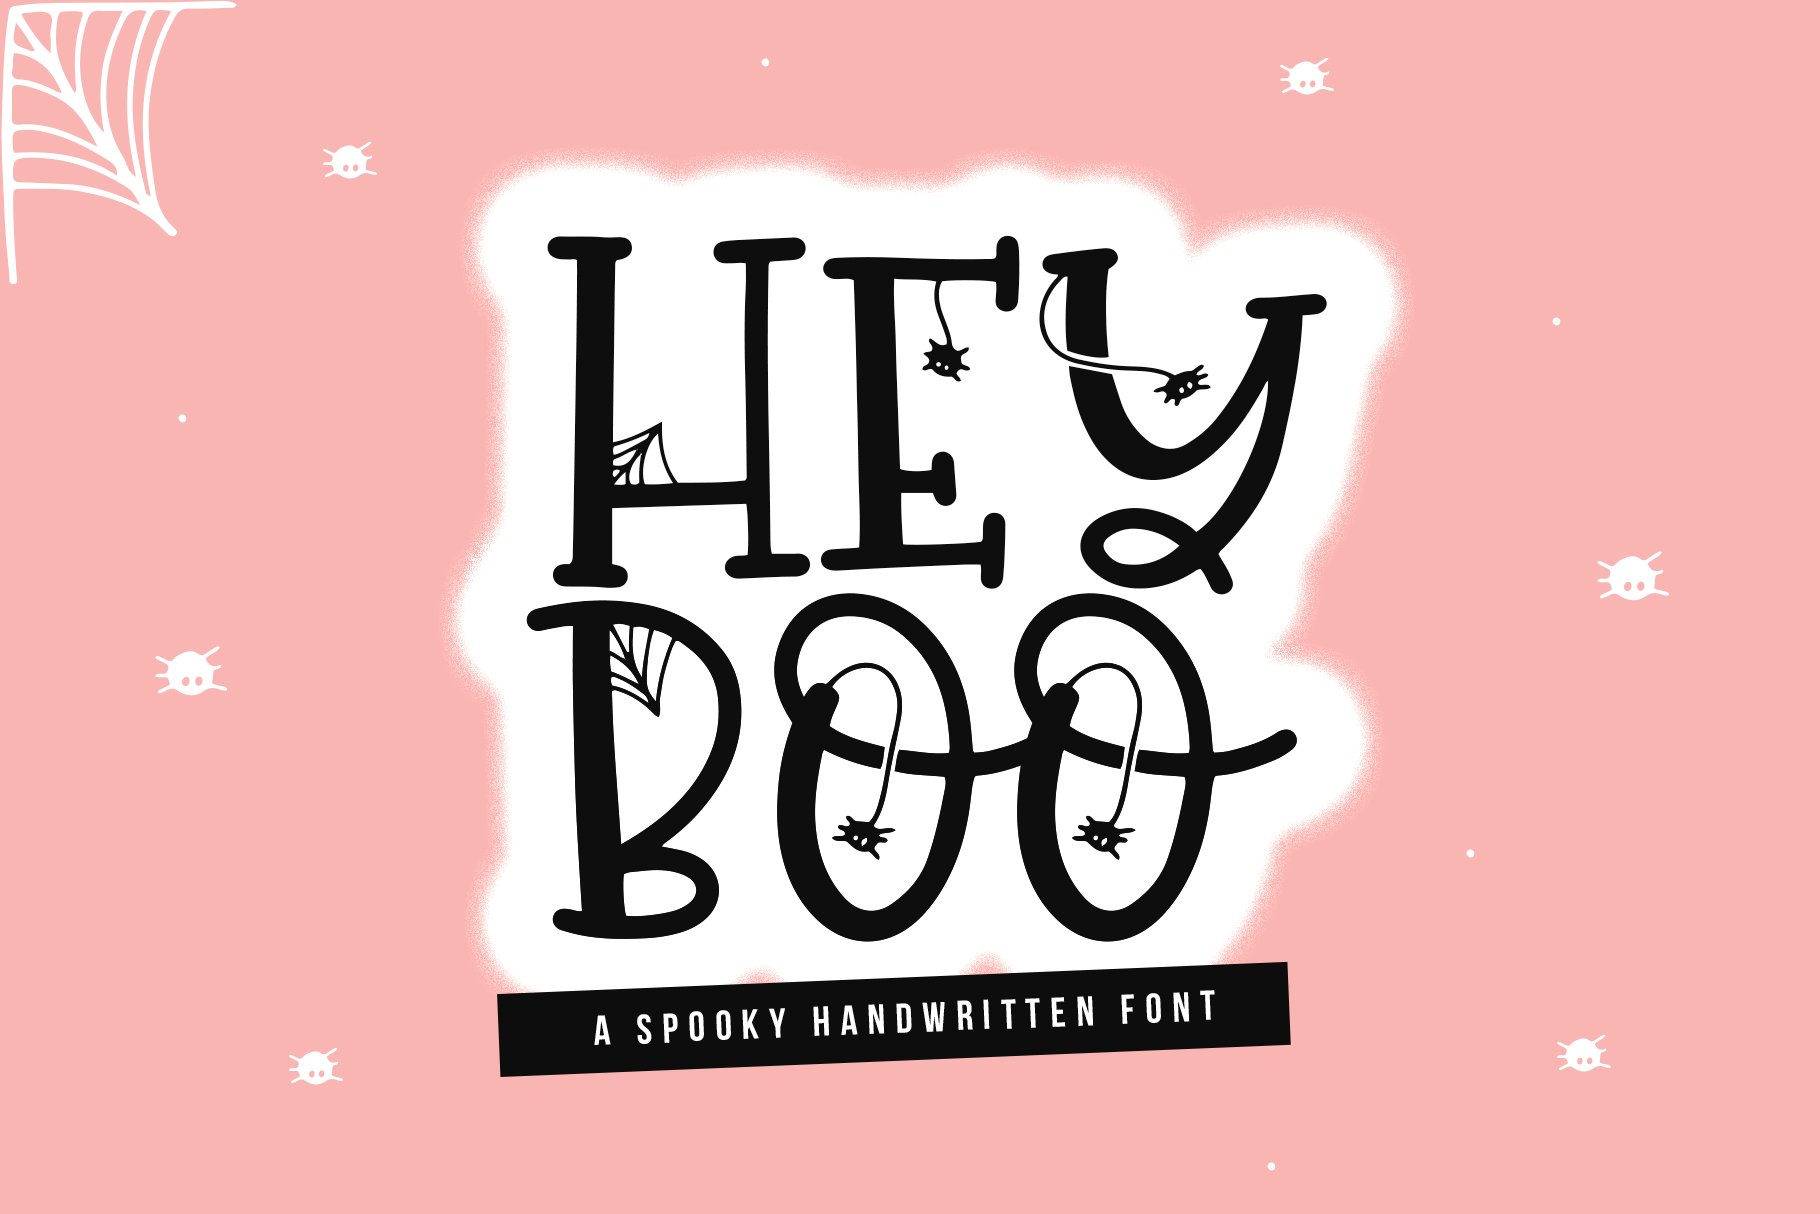 Hey Boo - Spooky Halloween Font cover image.